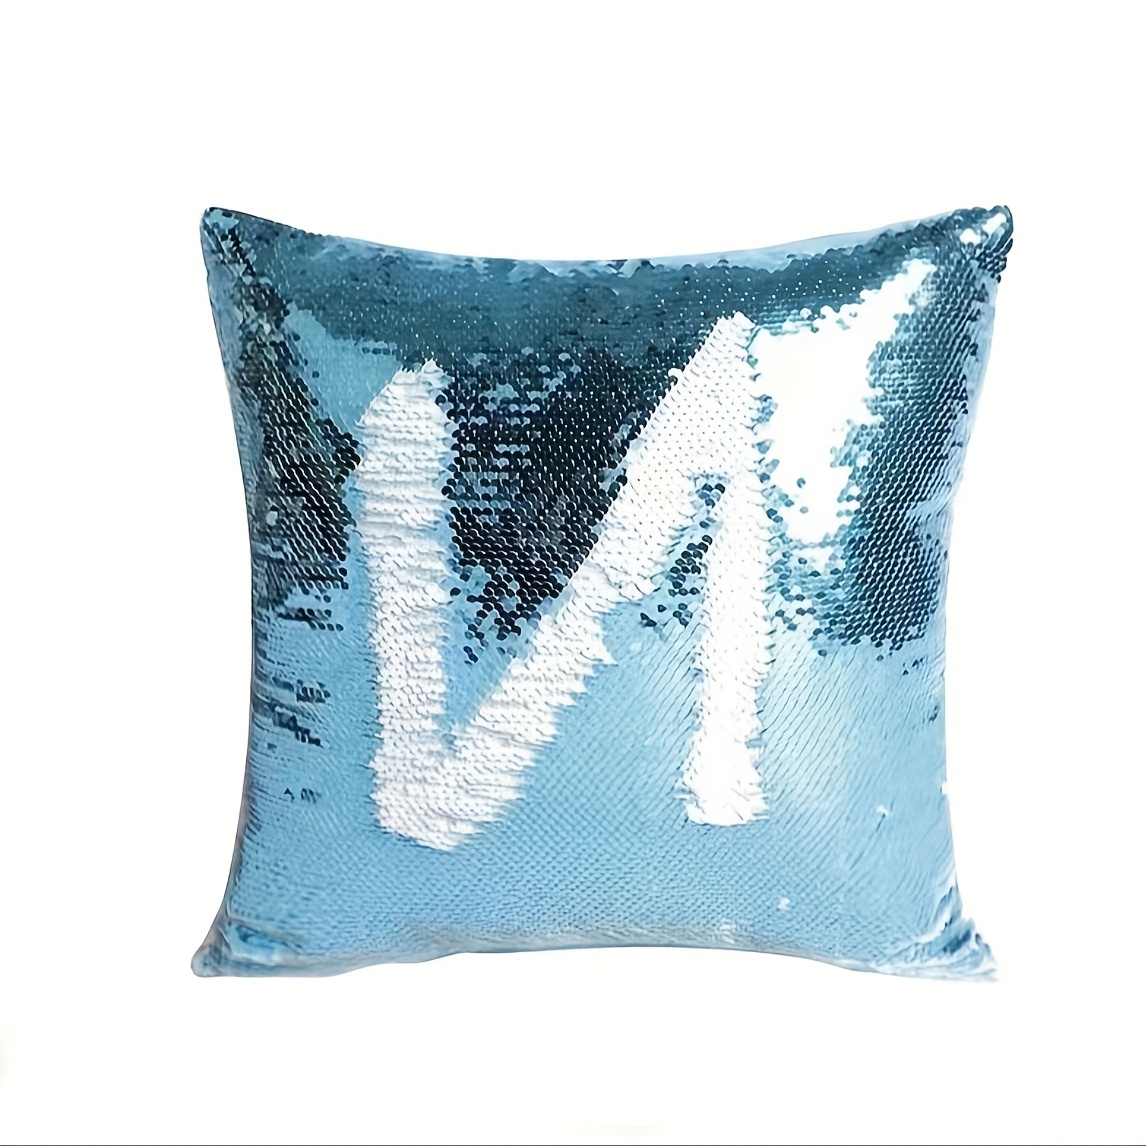 How to Sublimate a Sequin Pillow 